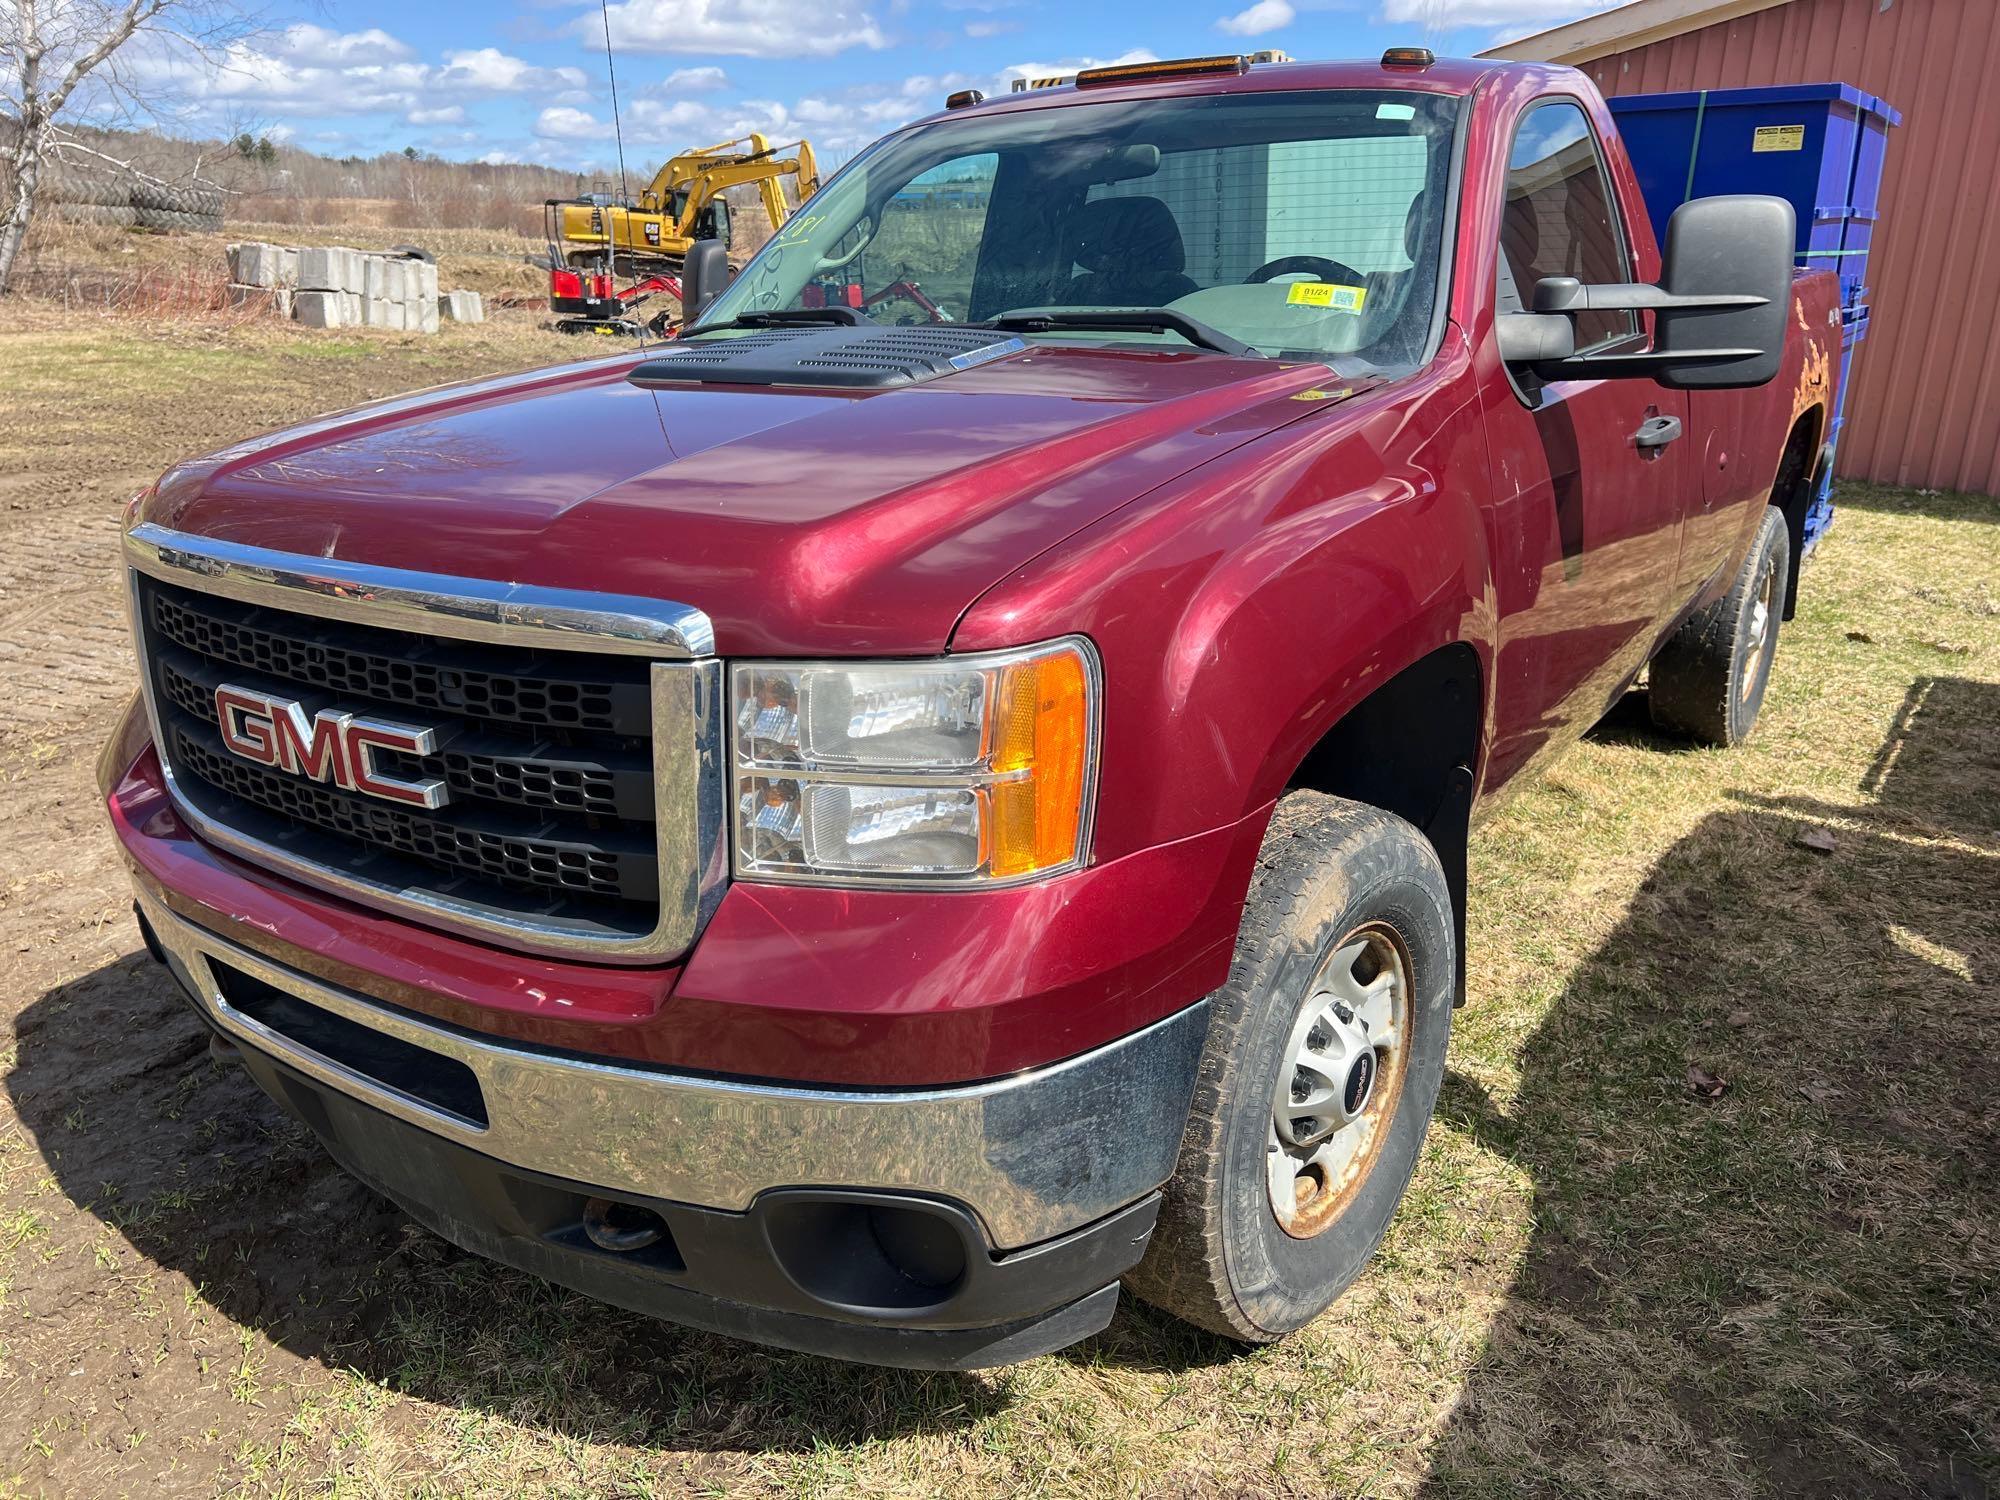 2013 GMC 2500 PICKUP TRUCK VN:274040 4x4, powered by V8 gas engine, equipped with automatic